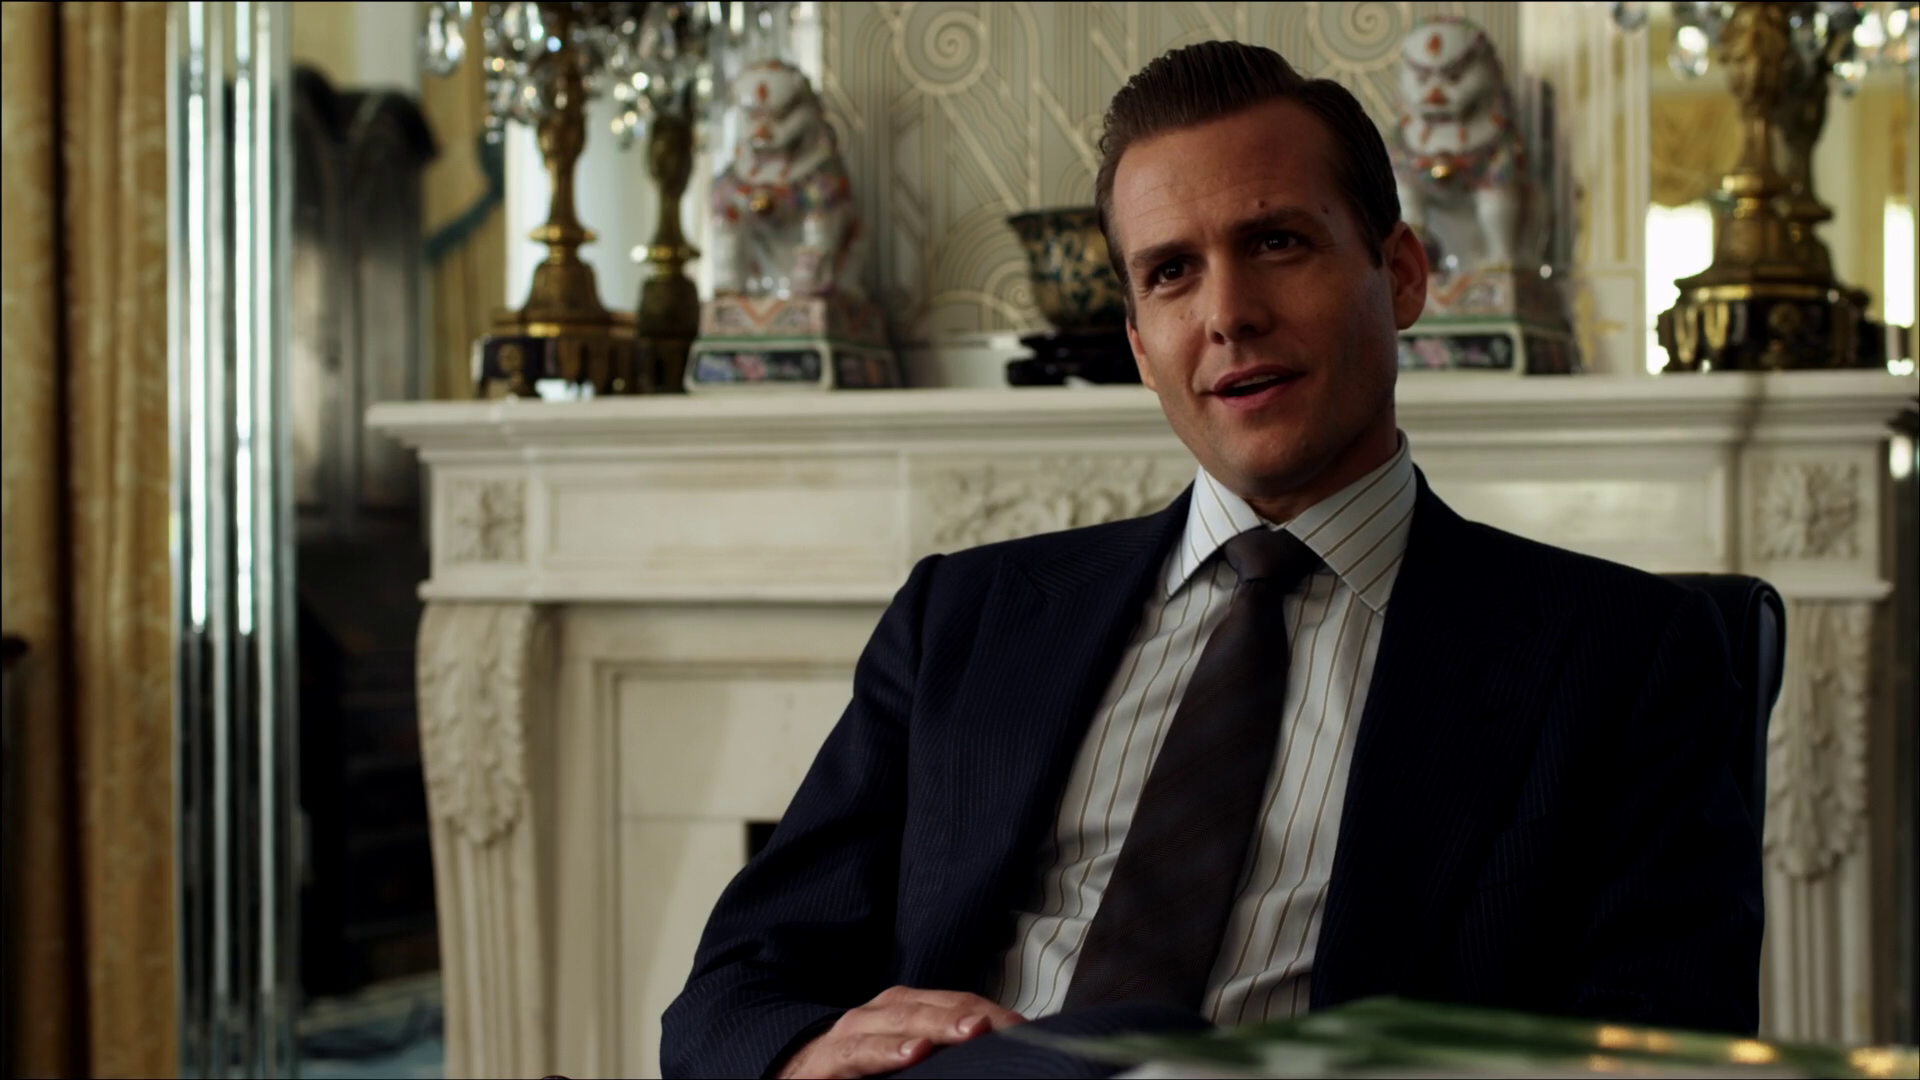 Image - S01E01P28 Harvey.png | Suits Wiki | FANDOM powered by Wikia